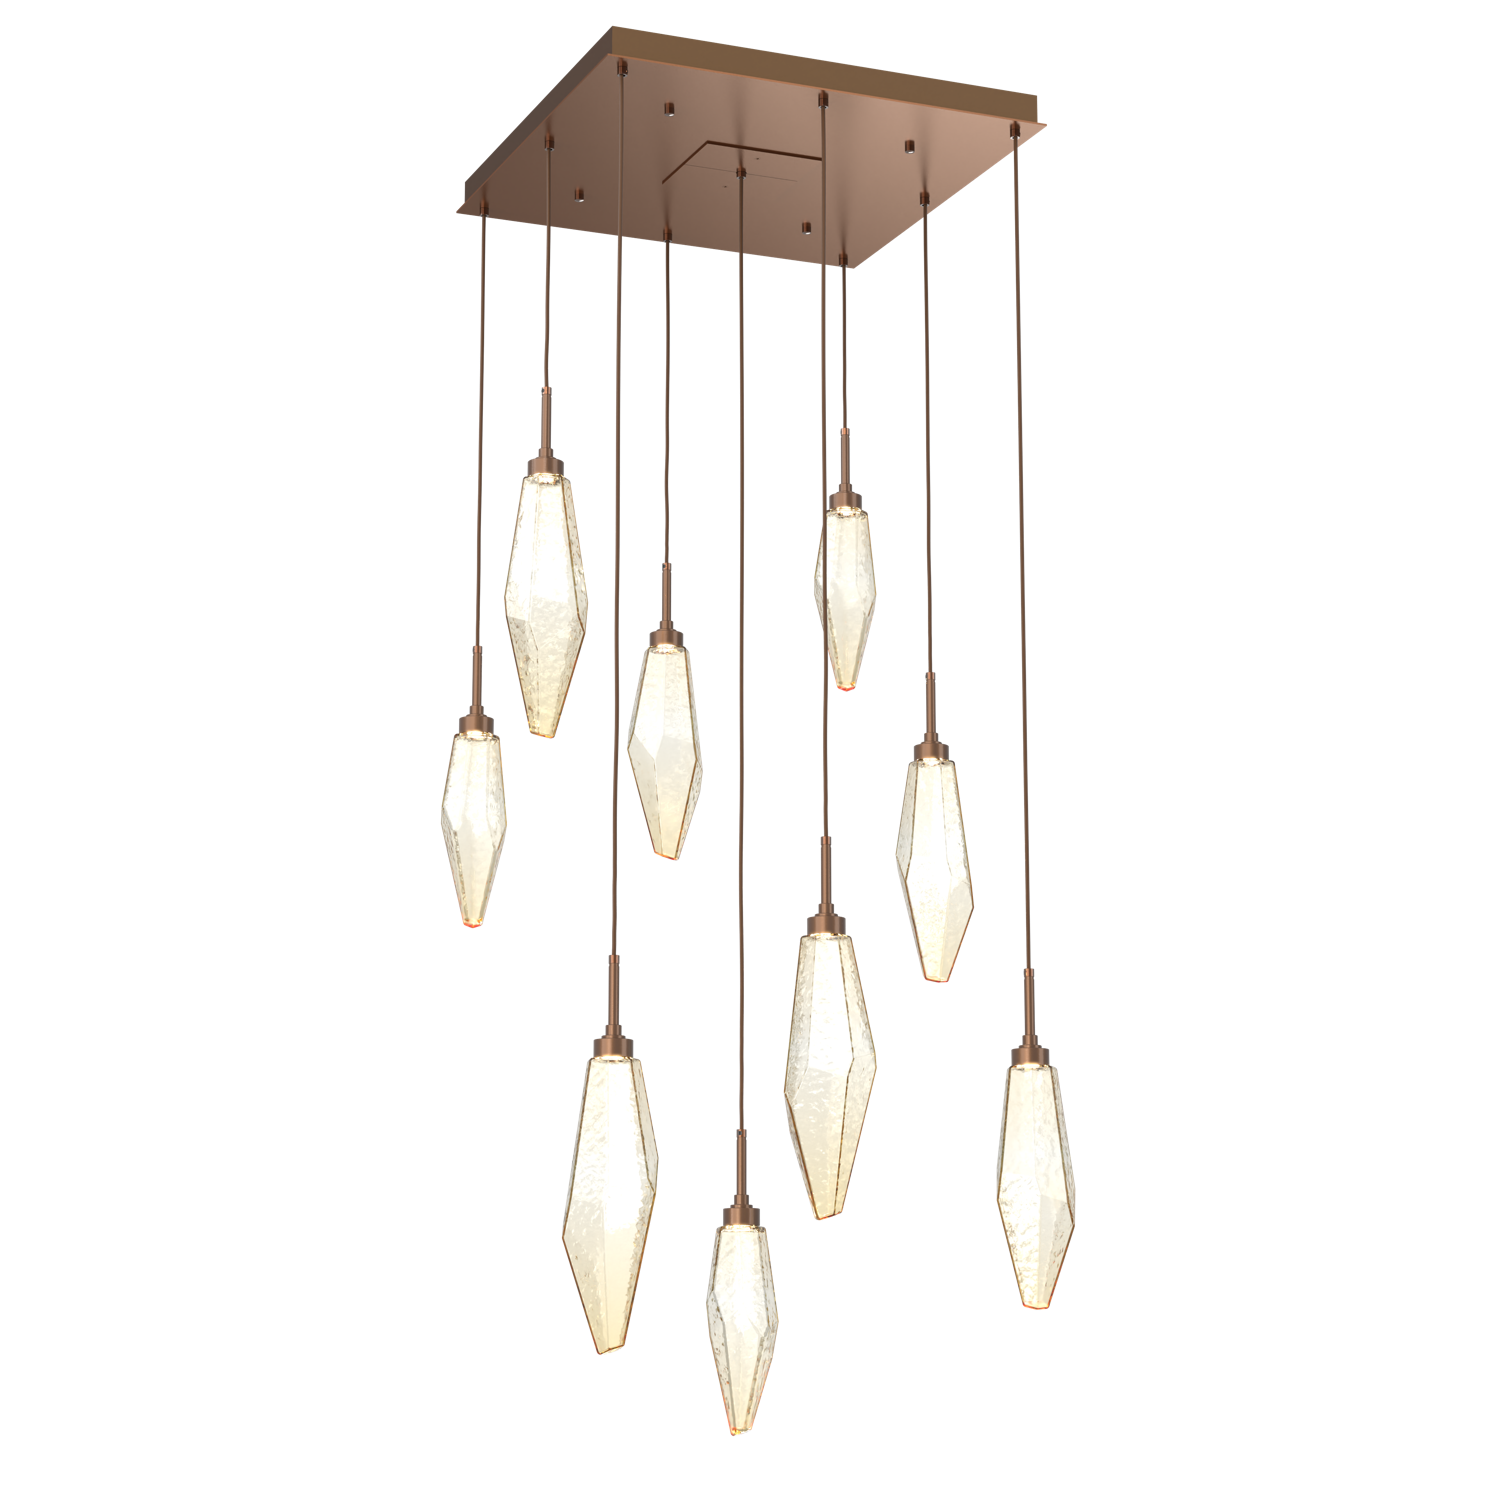 CHB0050-09-BB-CA-Hammerton-Studio-Rock-Crystal-9-light-square-pendant-chandelier-with-burnished-bronze-finish-and-chilled-amber-blown-glass-shades-and-LED-lamping